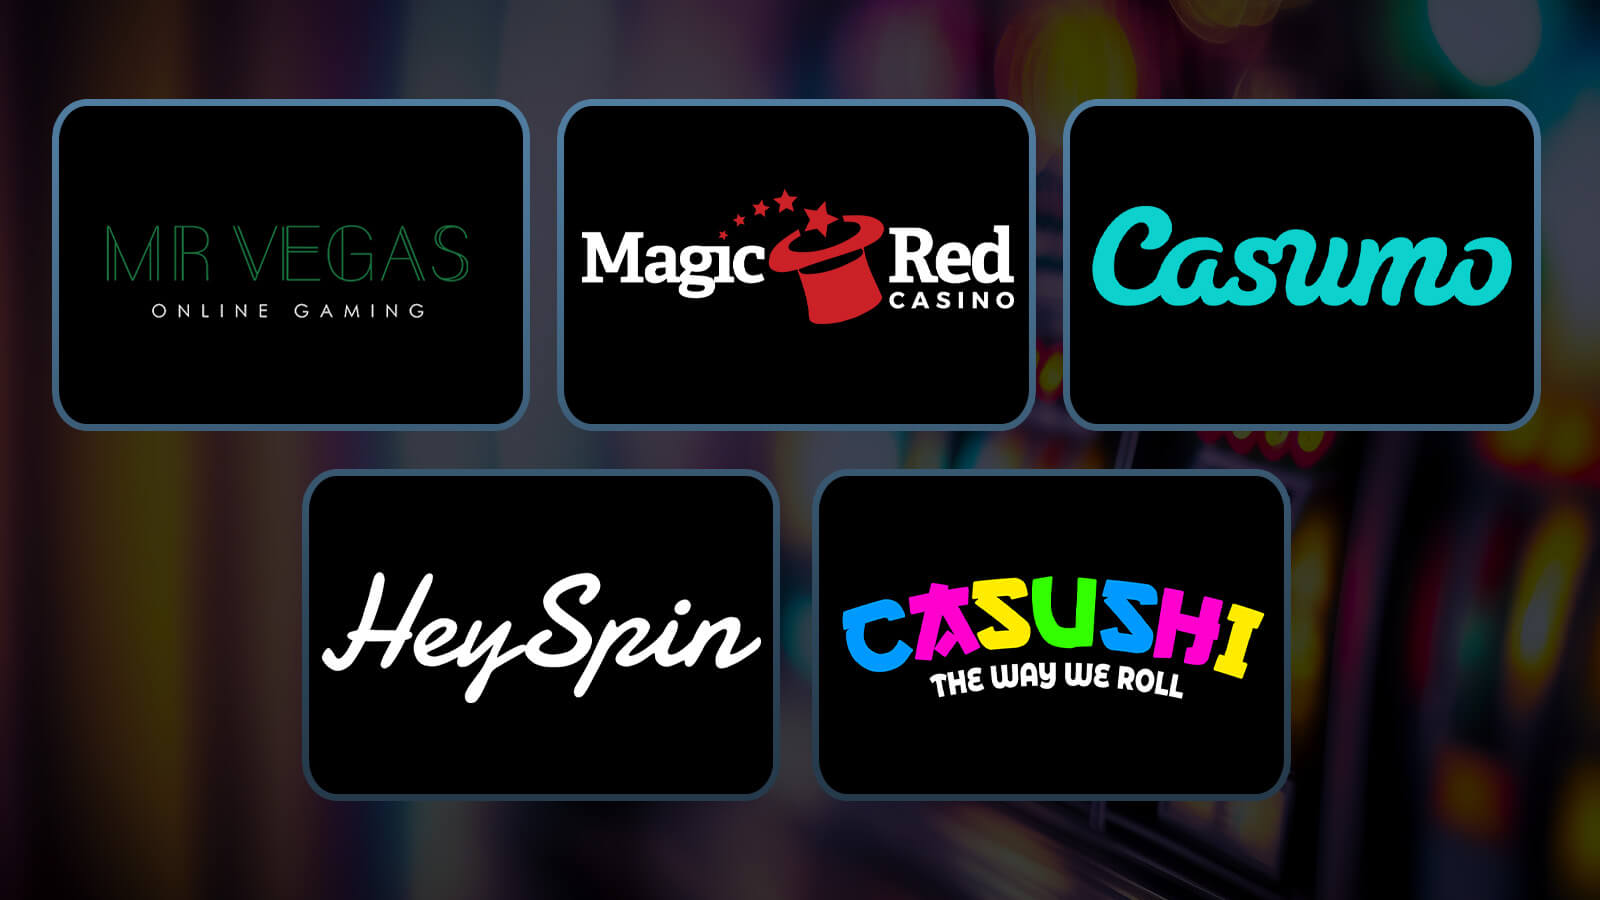 Our Picks for 5 Lightning-Fast Payout Debit Card Casinos